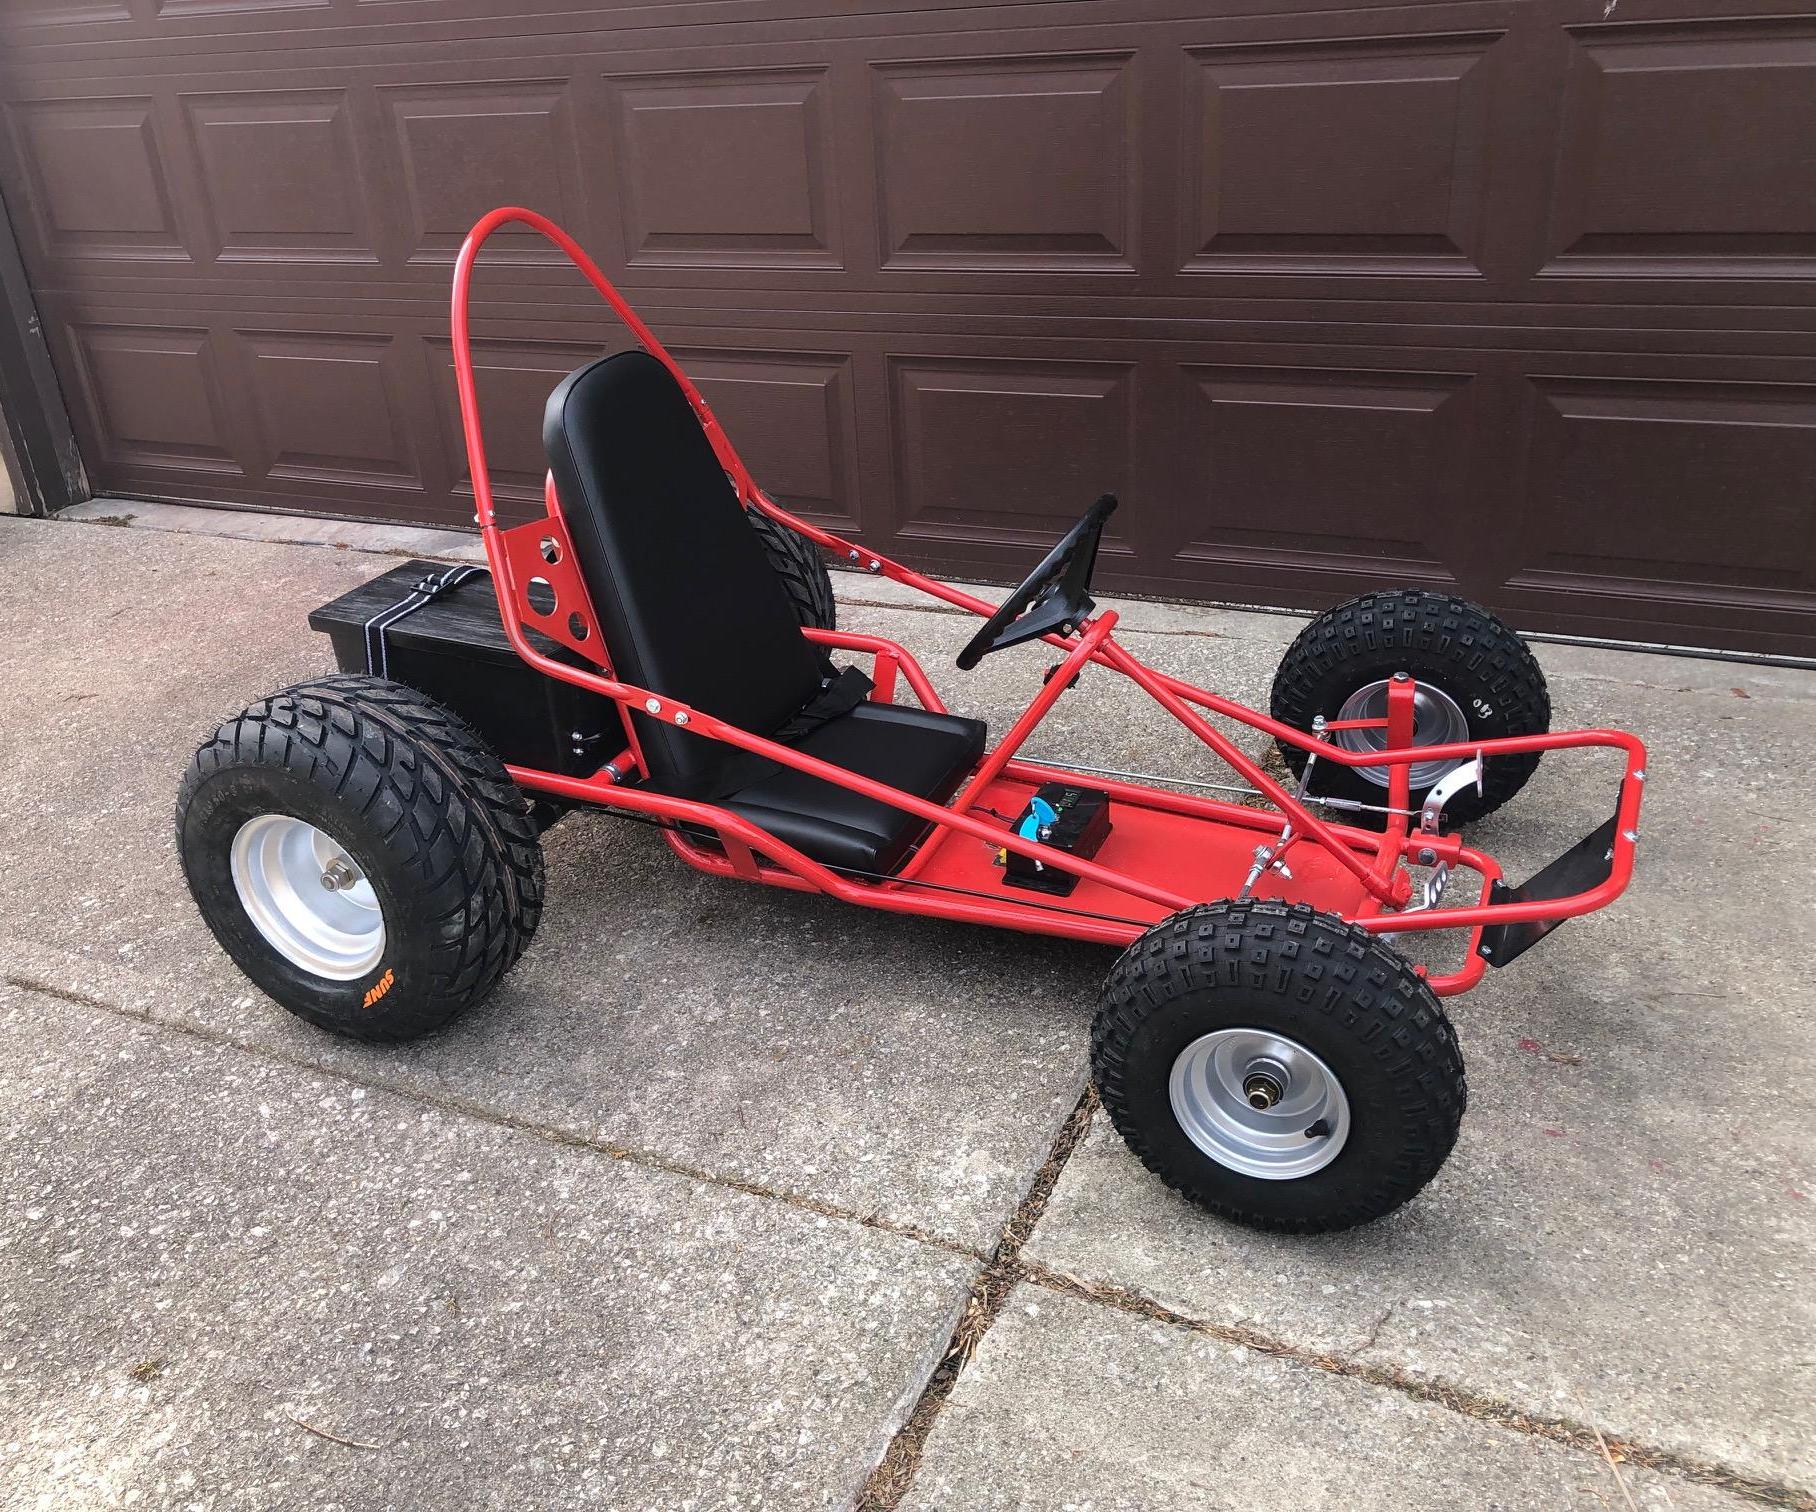 Stock Go-Kart Conversion to Electric Power